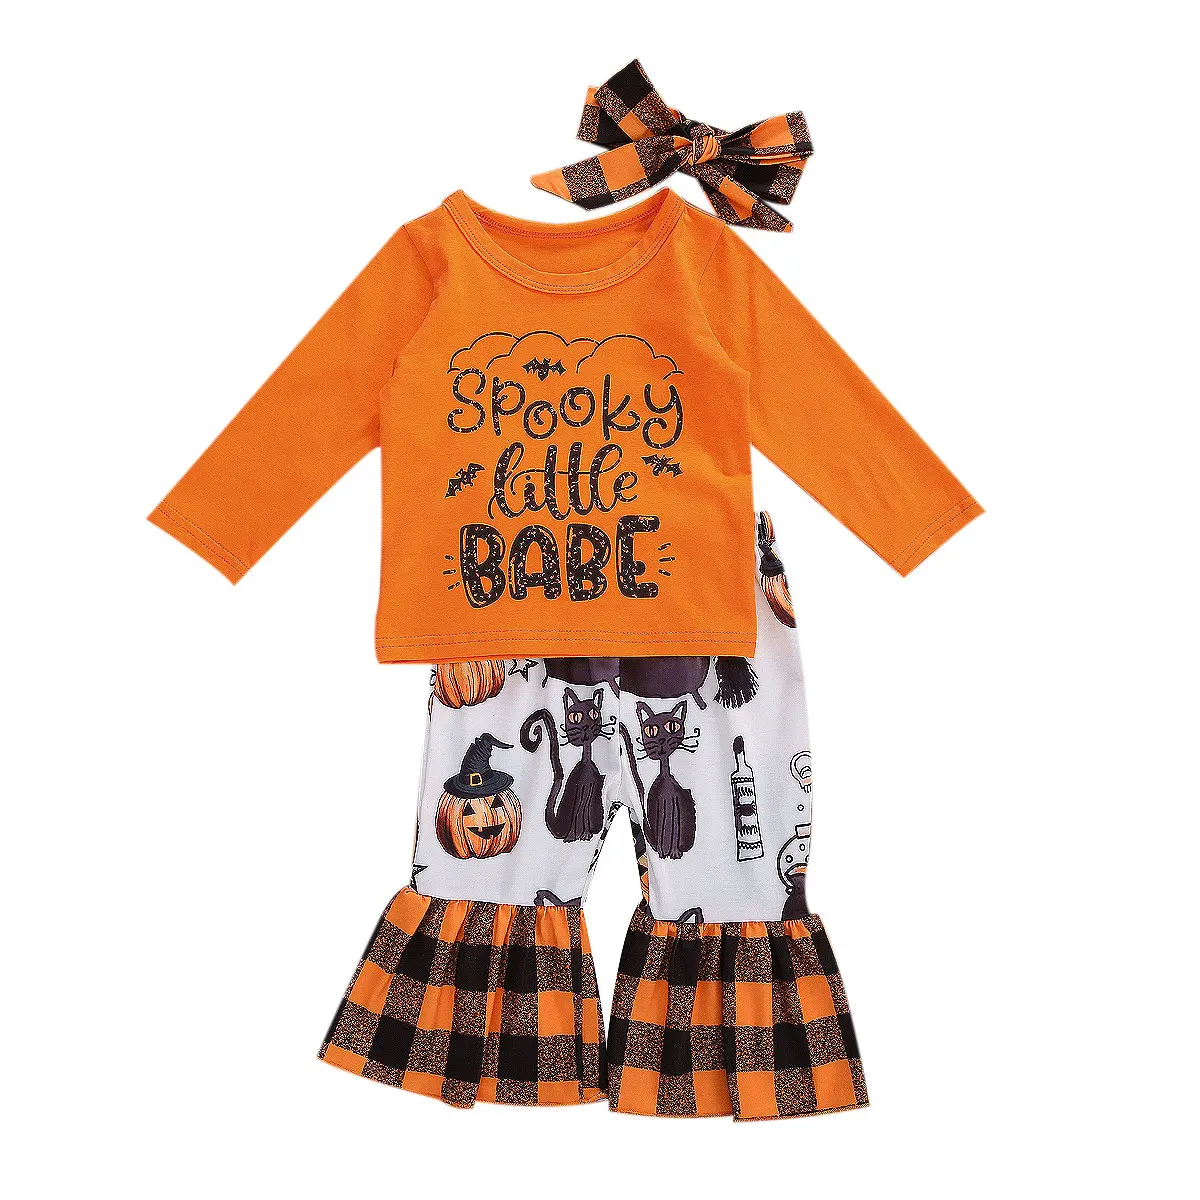 

2020-07-21 Lioraitiin Baby Halloween 0-3years Toddler Baby Girl Long Sleeve Letter Little Babe Printed Pumpkin Pant 3Pcs Outfit